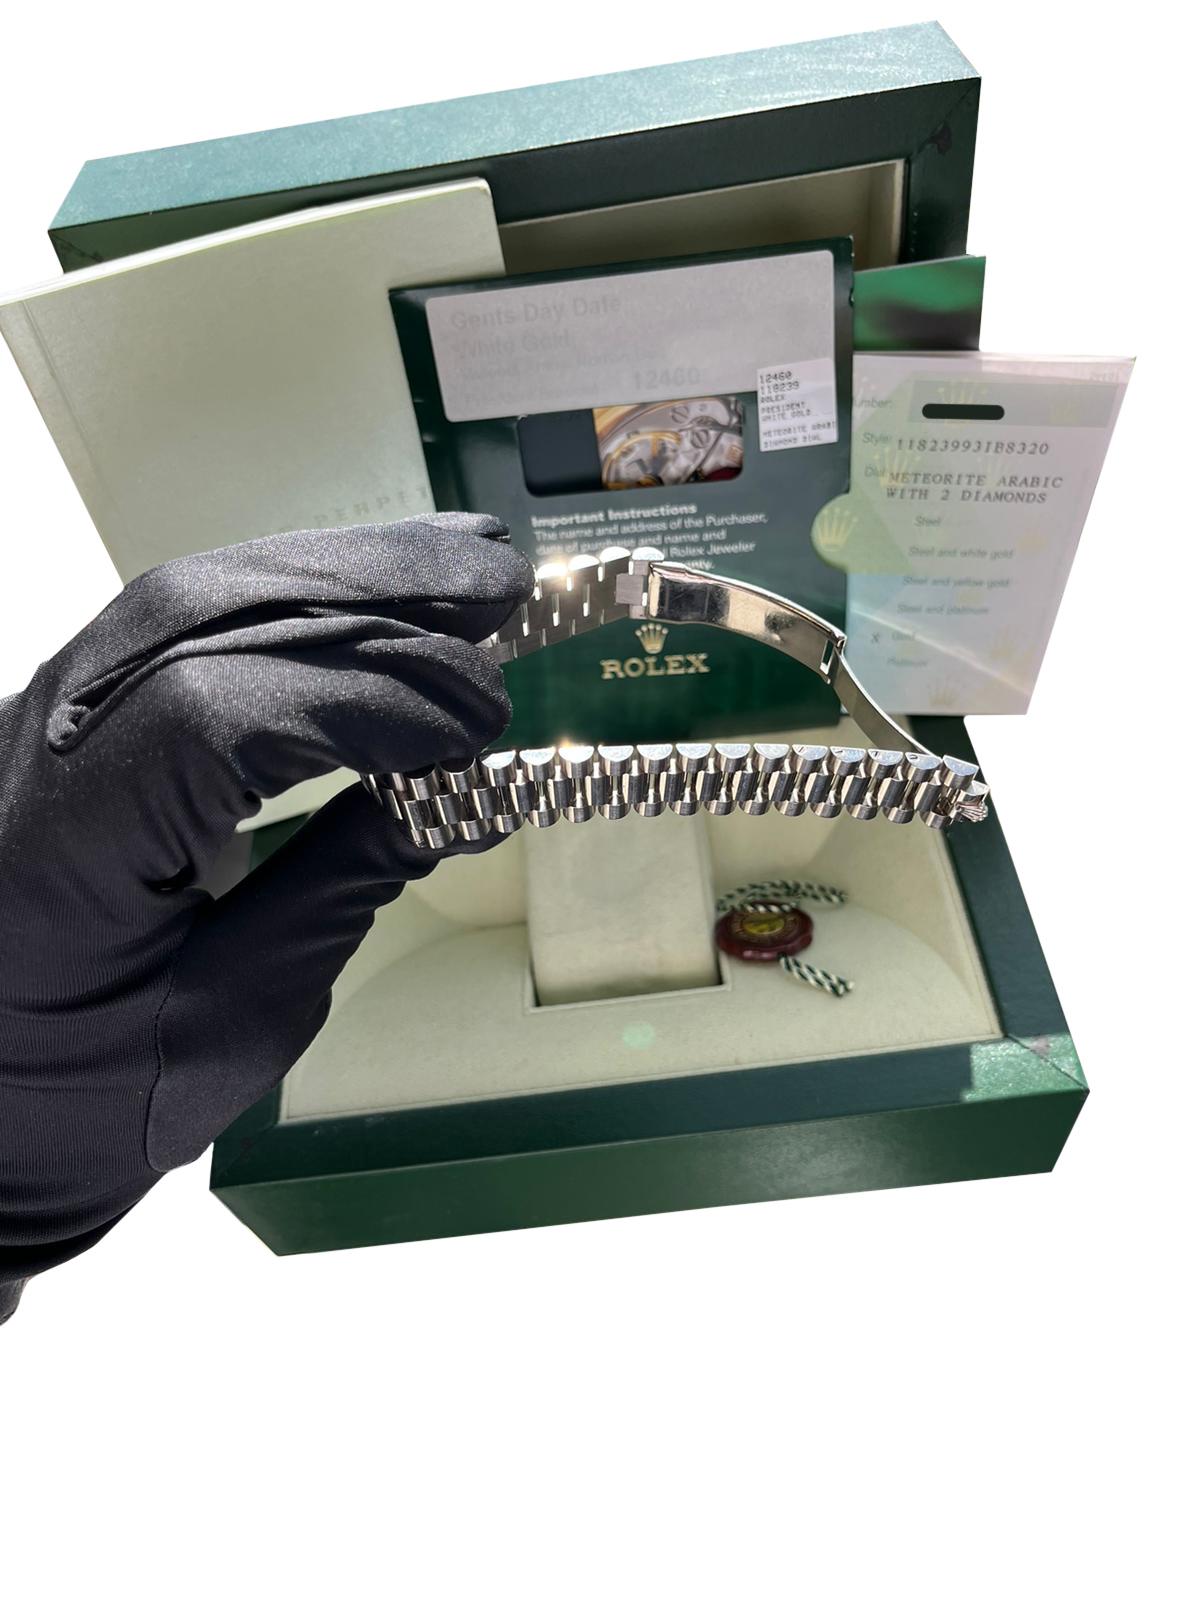 Rolex Day-Date 36mm 18k White Gold Fluted Bezel Meteorite 2 Diamonds Dial 118239 For Sale 14